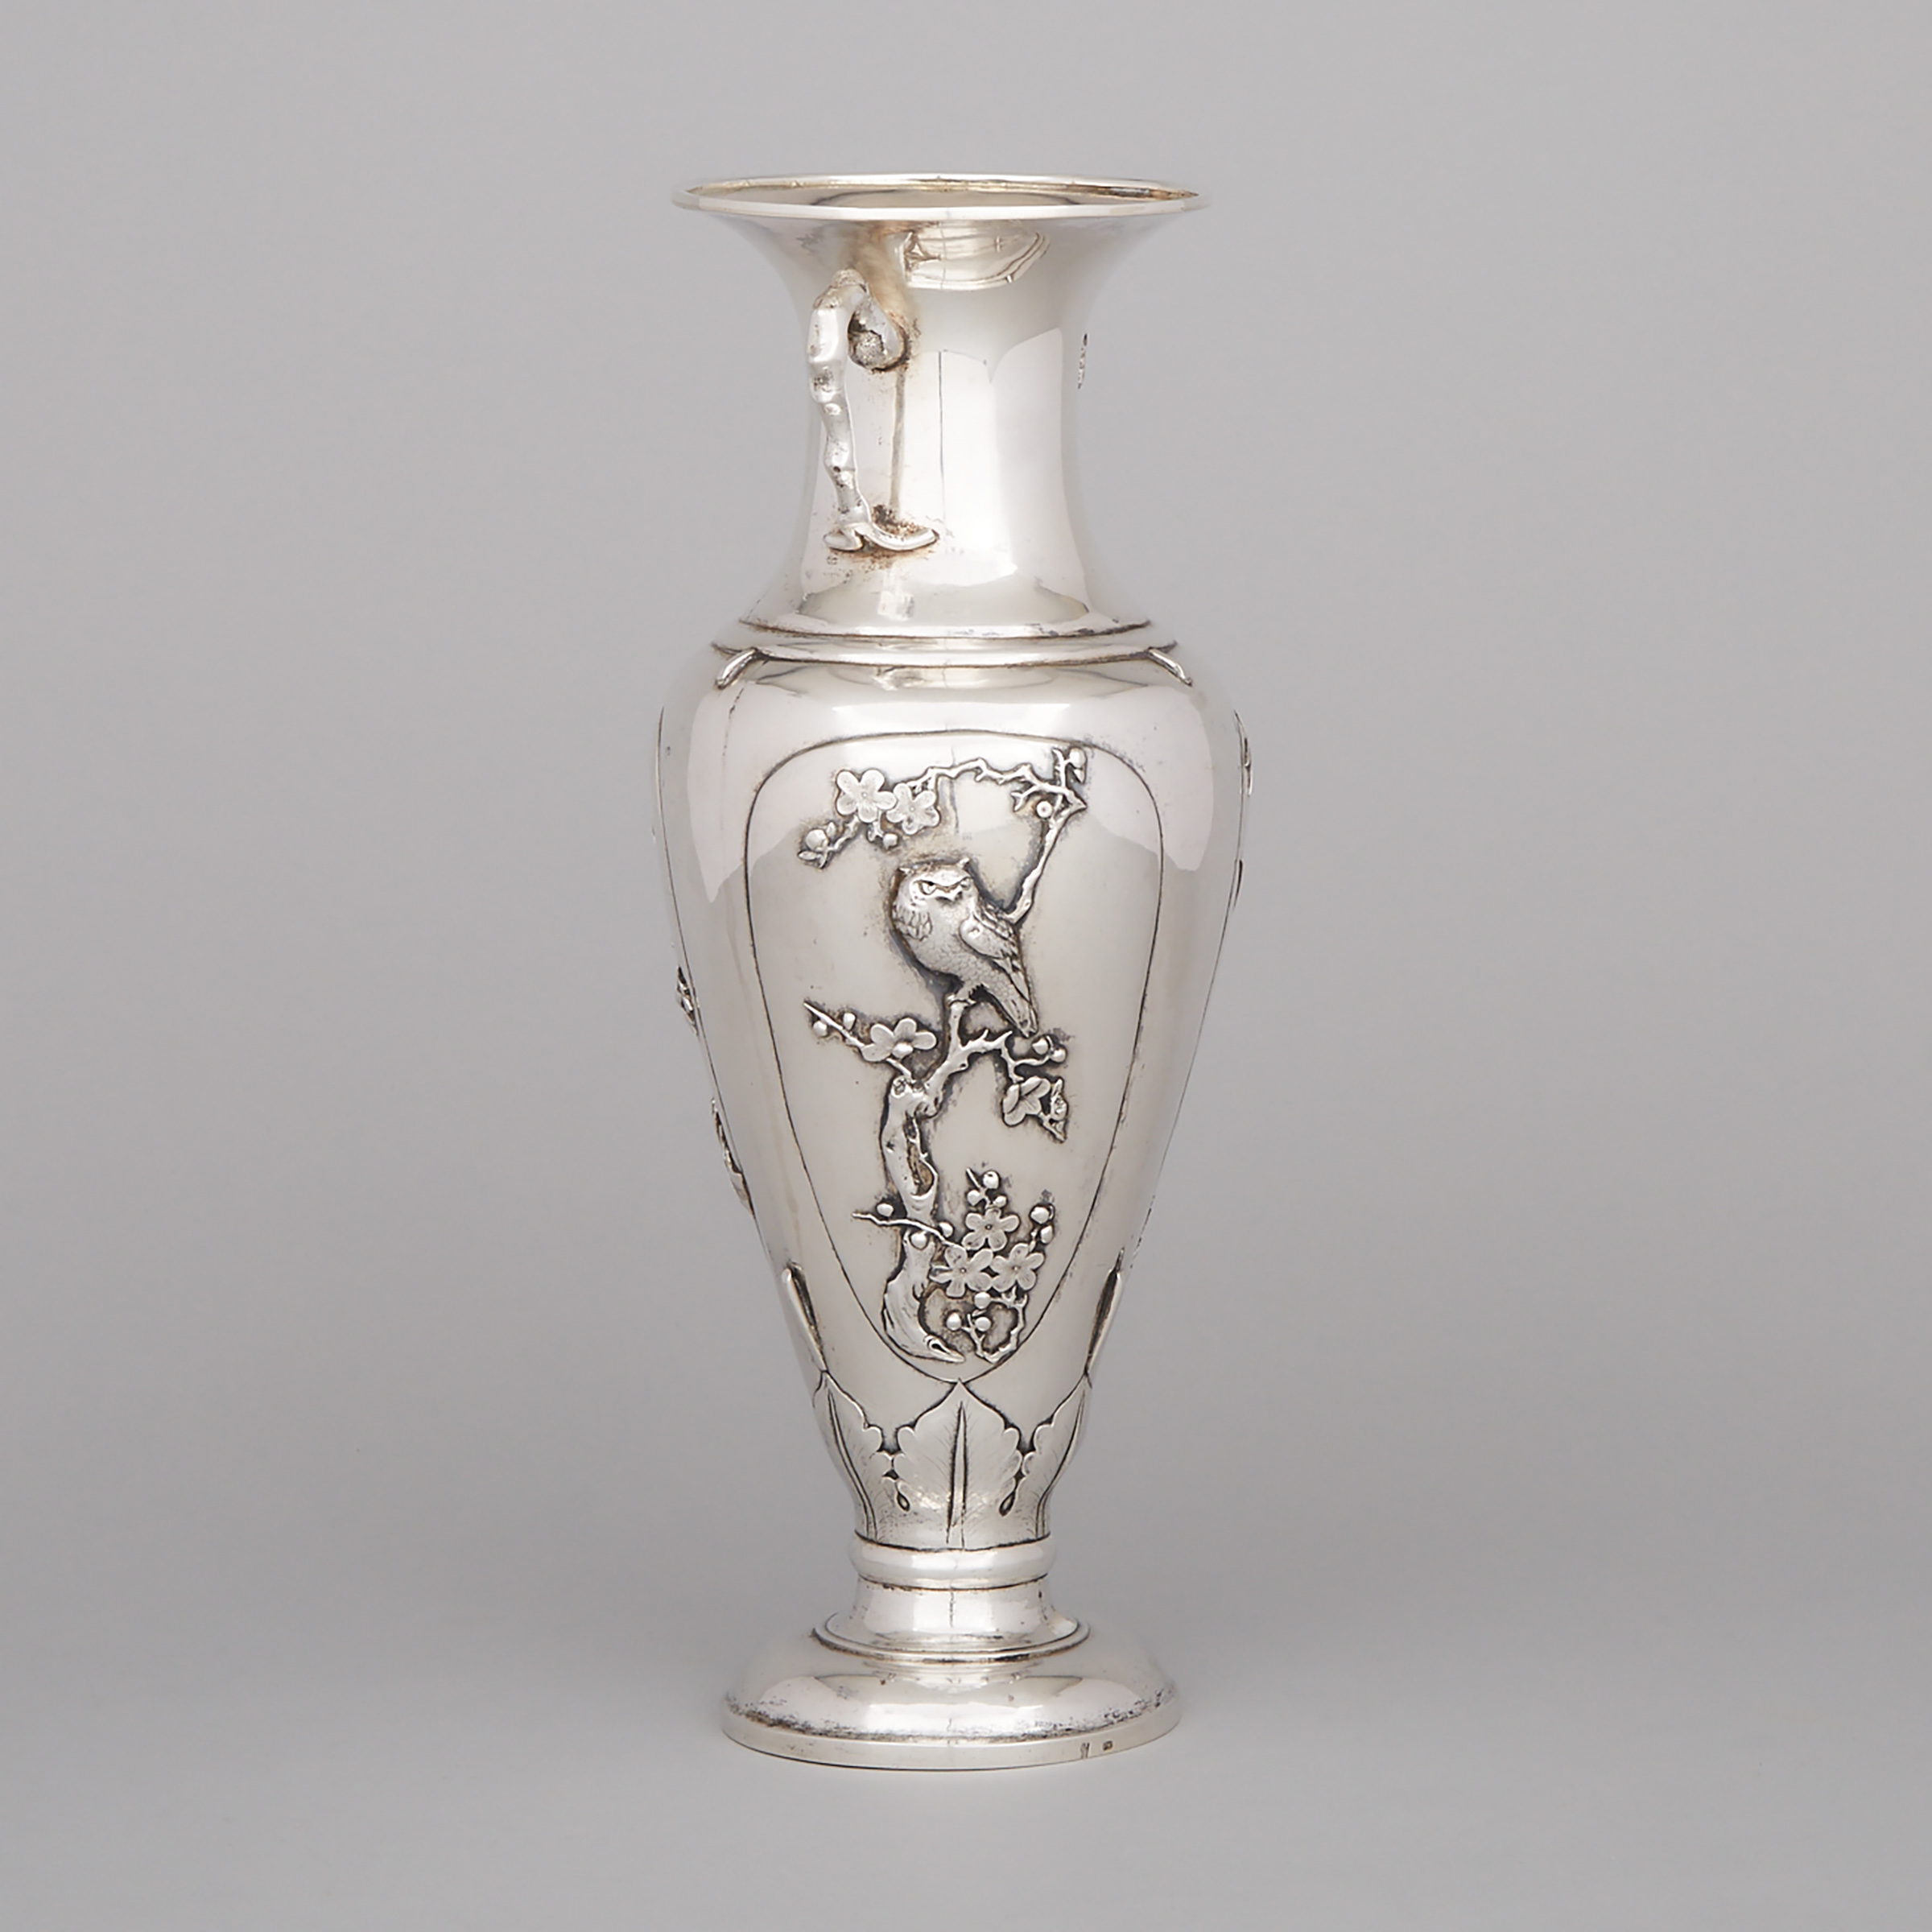 Chinese Export Silver Two-Handled Vase, Pao Kuang, Canton, late 19th/early 20th century